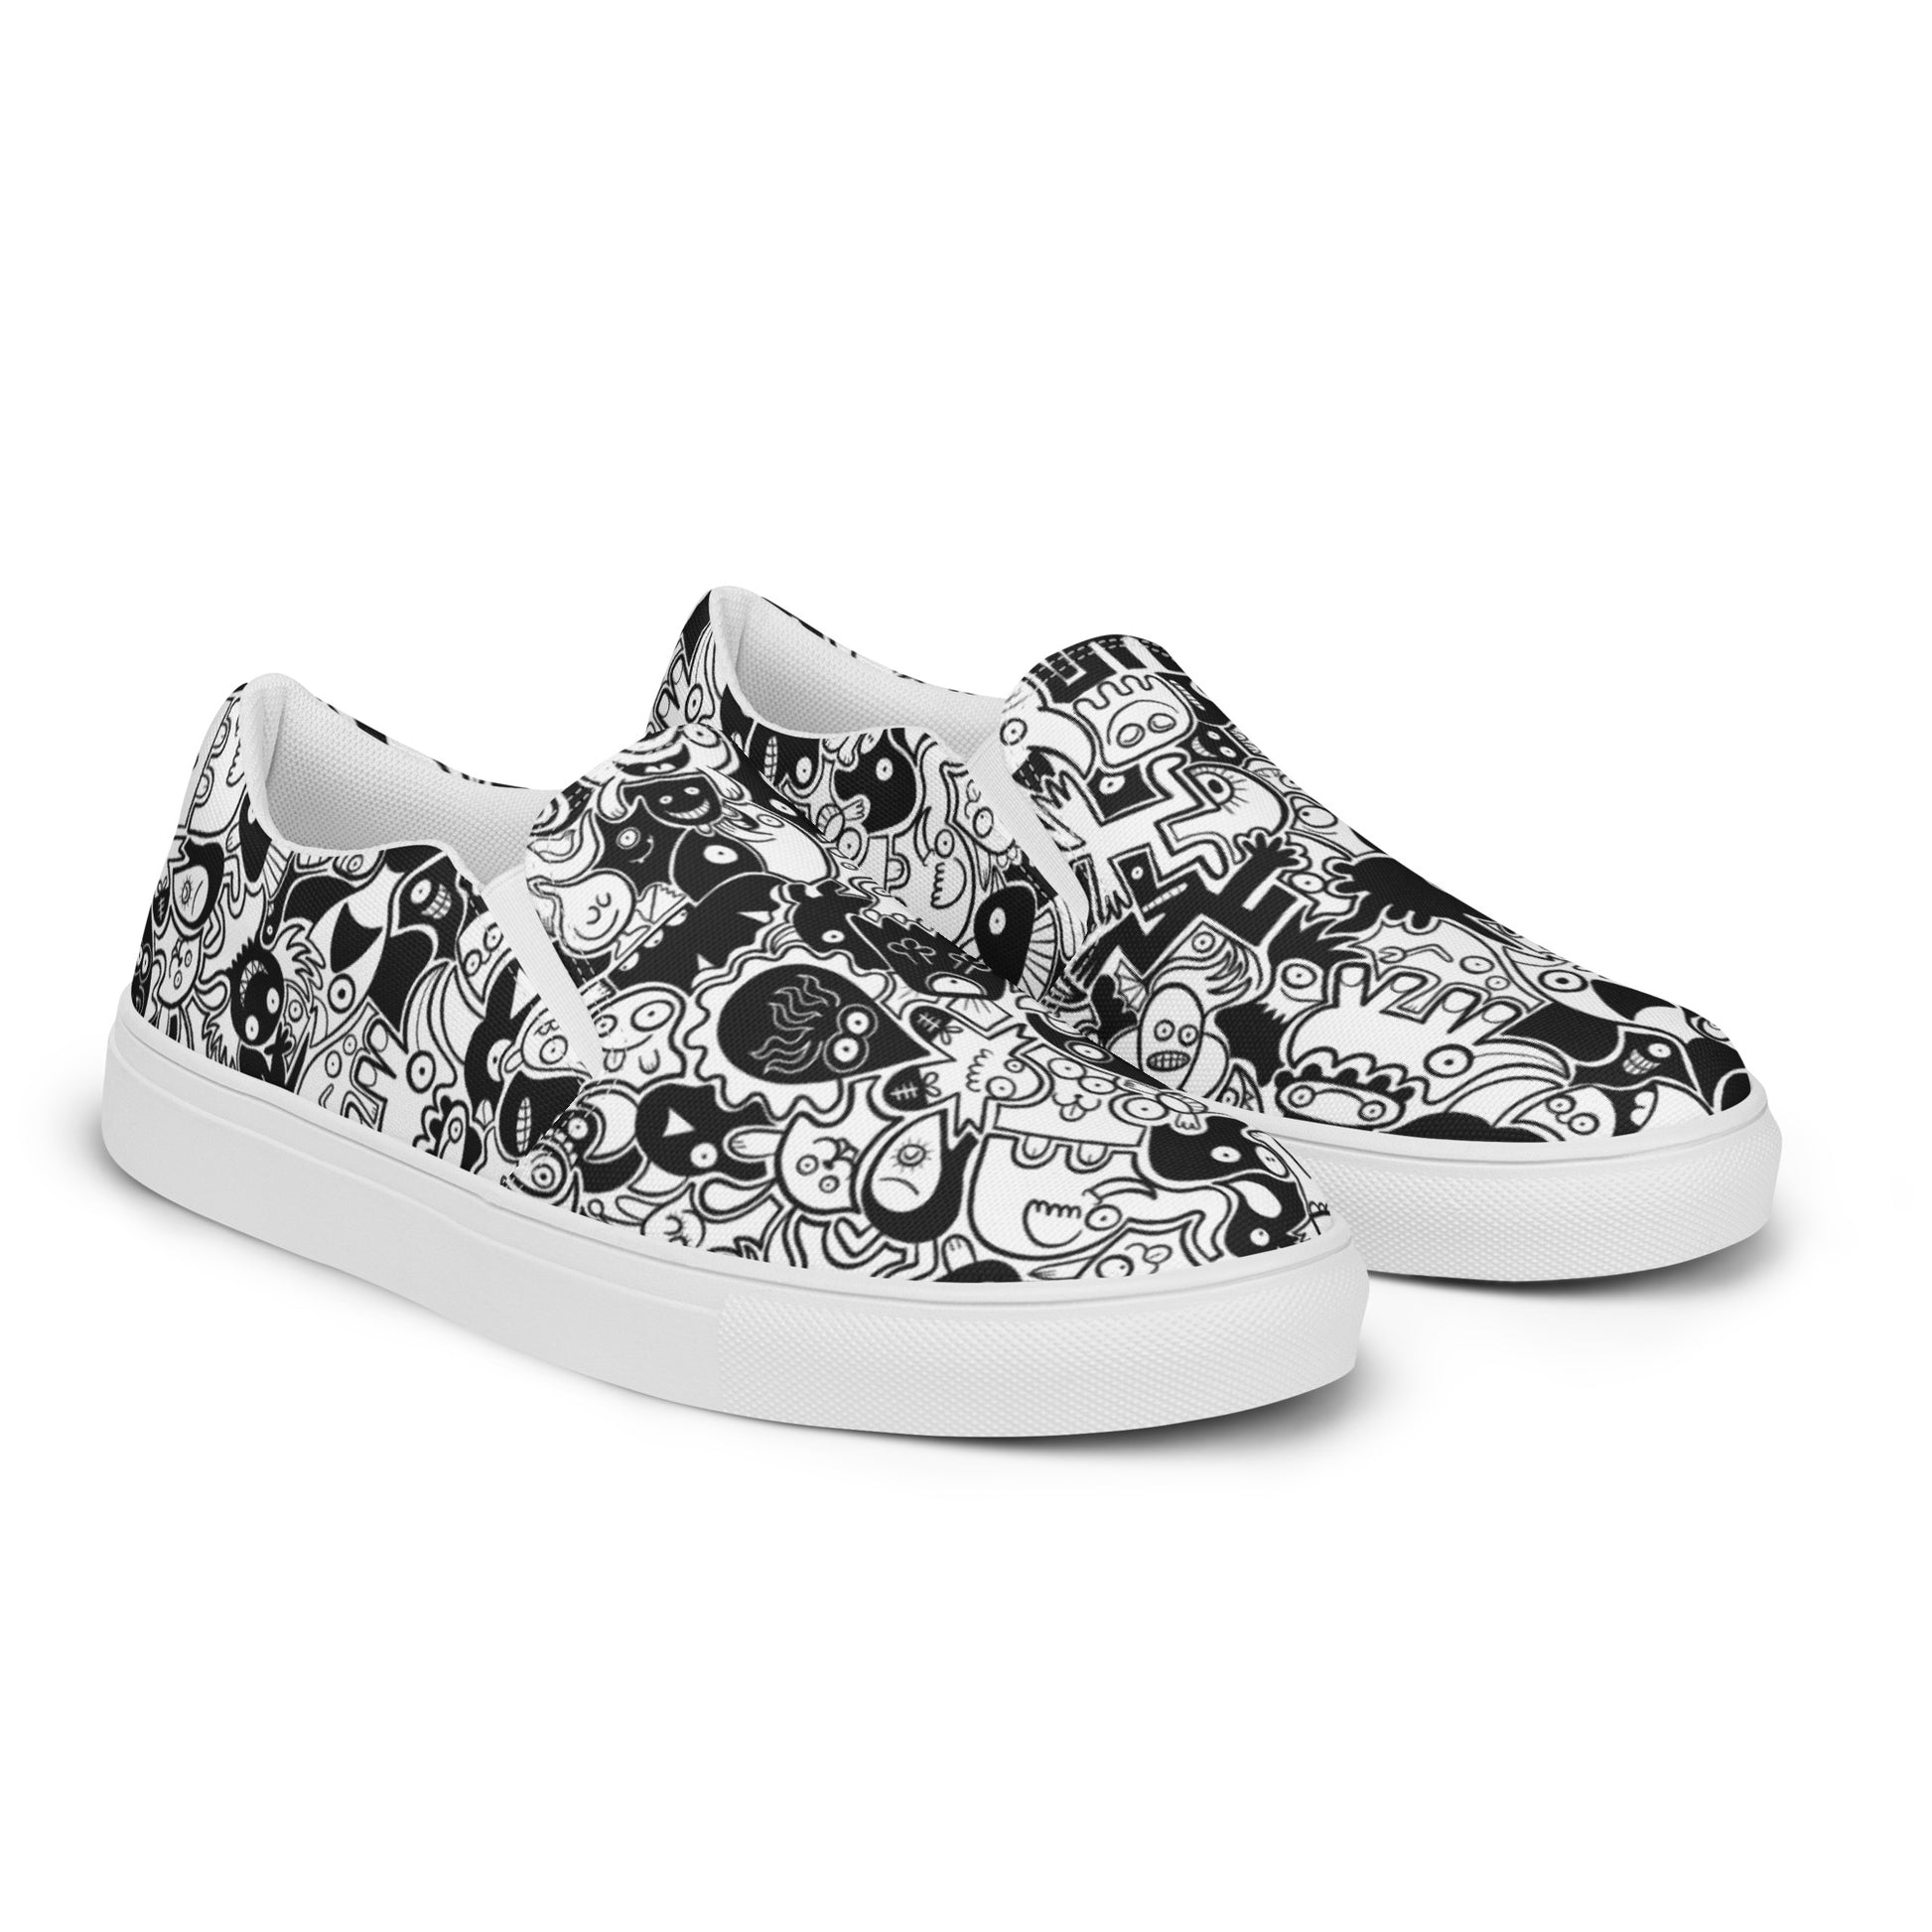 Joyful crowd of black and white doodle creatures Women’s slip-on canvas shoes. Overview